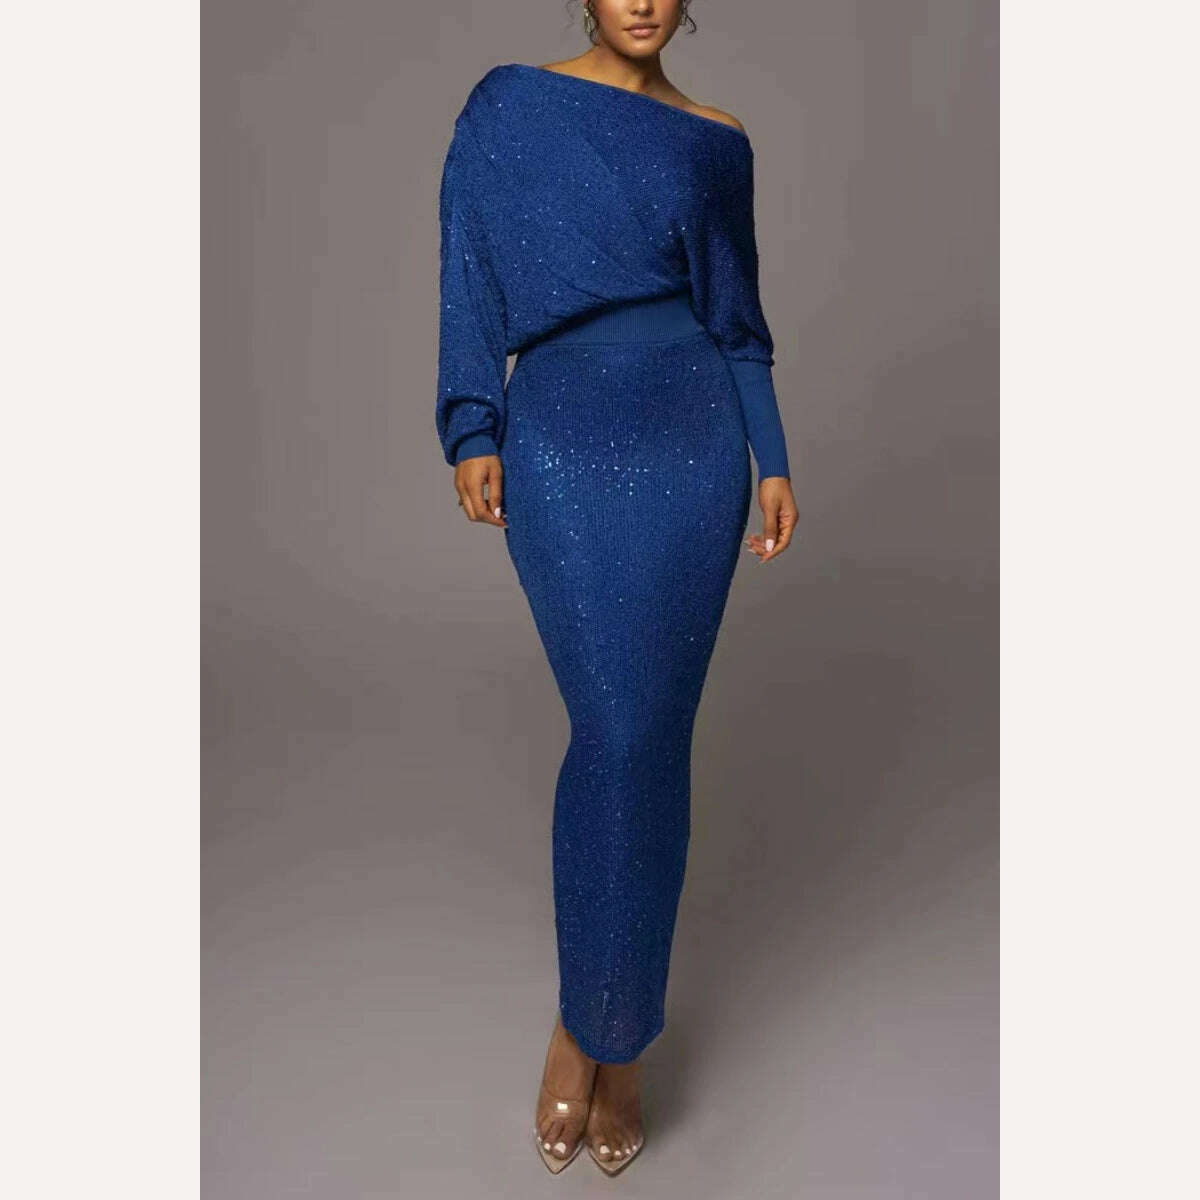 KIMLUD, Mikydely Autumn New Elegant Off The Shoulder Knitted  Dress Woman Long sleeve Festive Dress, blue / S, KIMLUD Womens Clothes